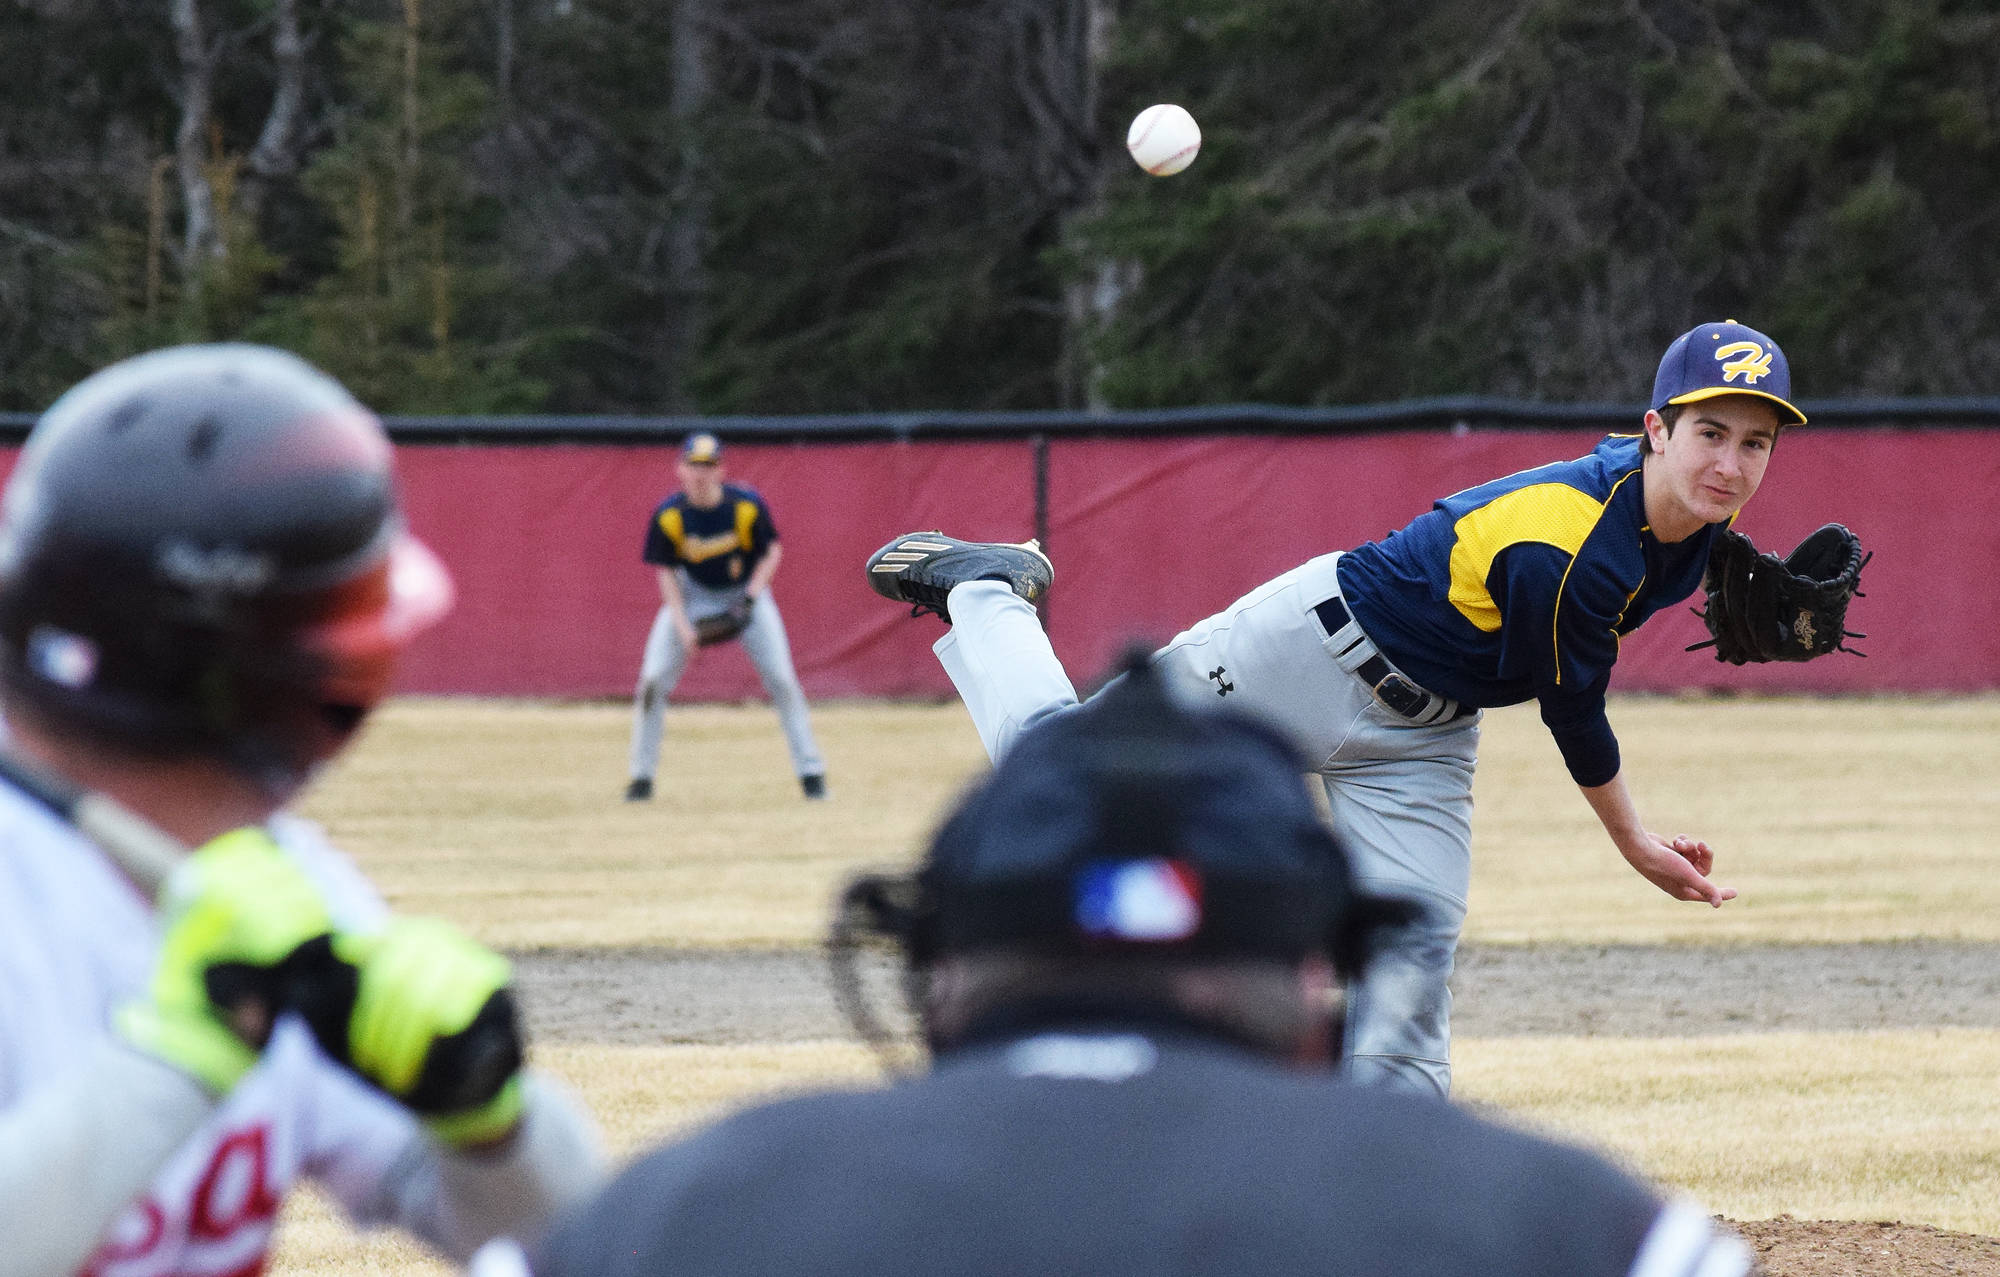 Homer’s Joe Ravin offers up a pitch to a Kenai Central batter May 2, 2017, at the Kenai Little League Fields. (Photo by Joey Klecka/Peninsula Clarion)